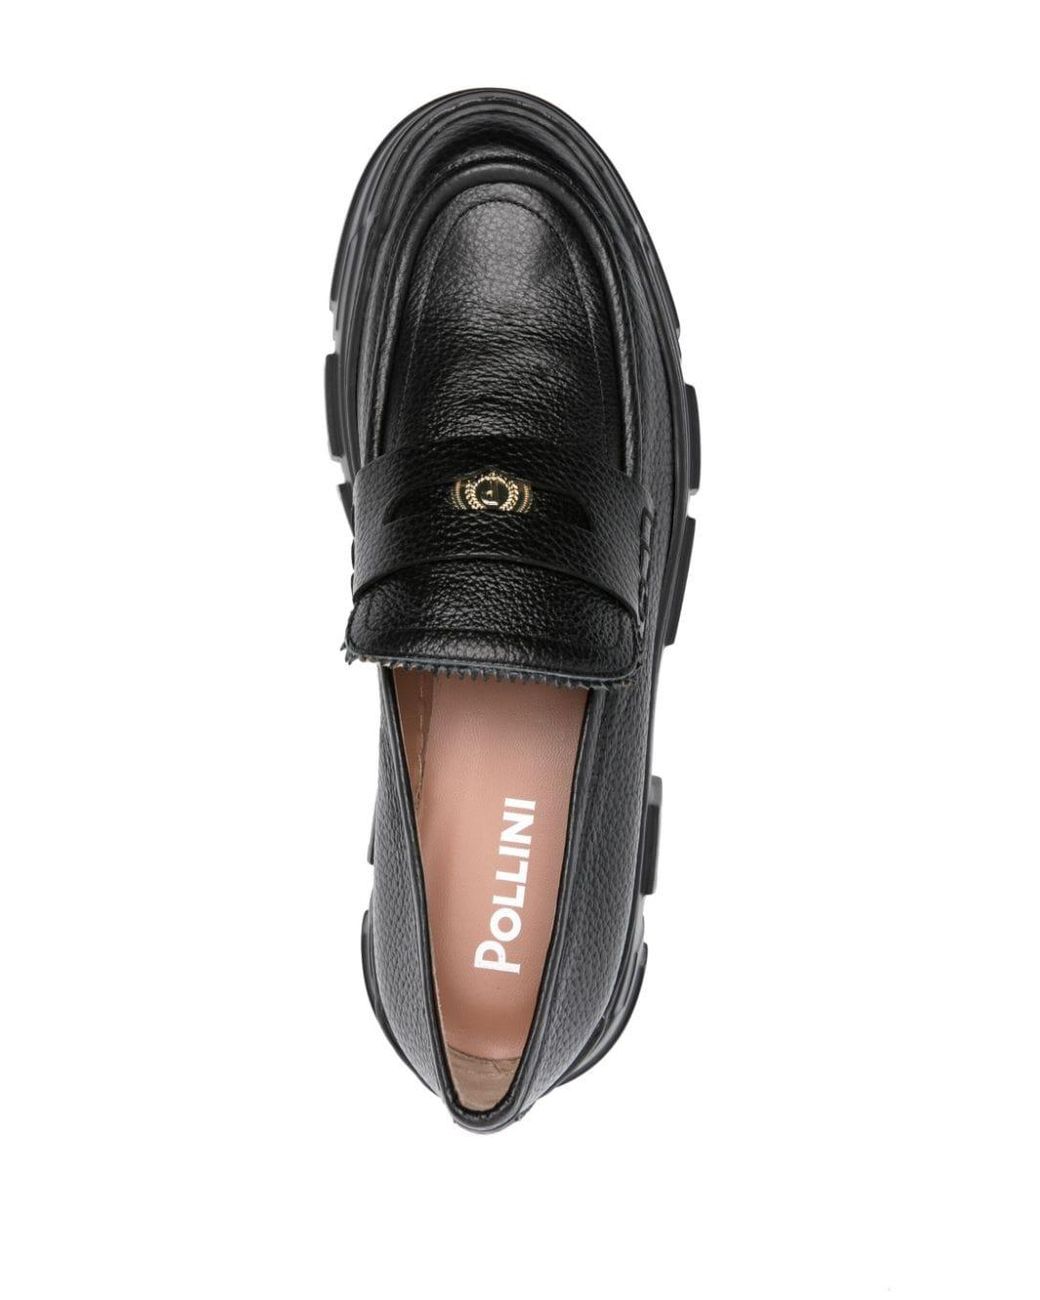 Pollini Royal Penny Leather Loafers in Black